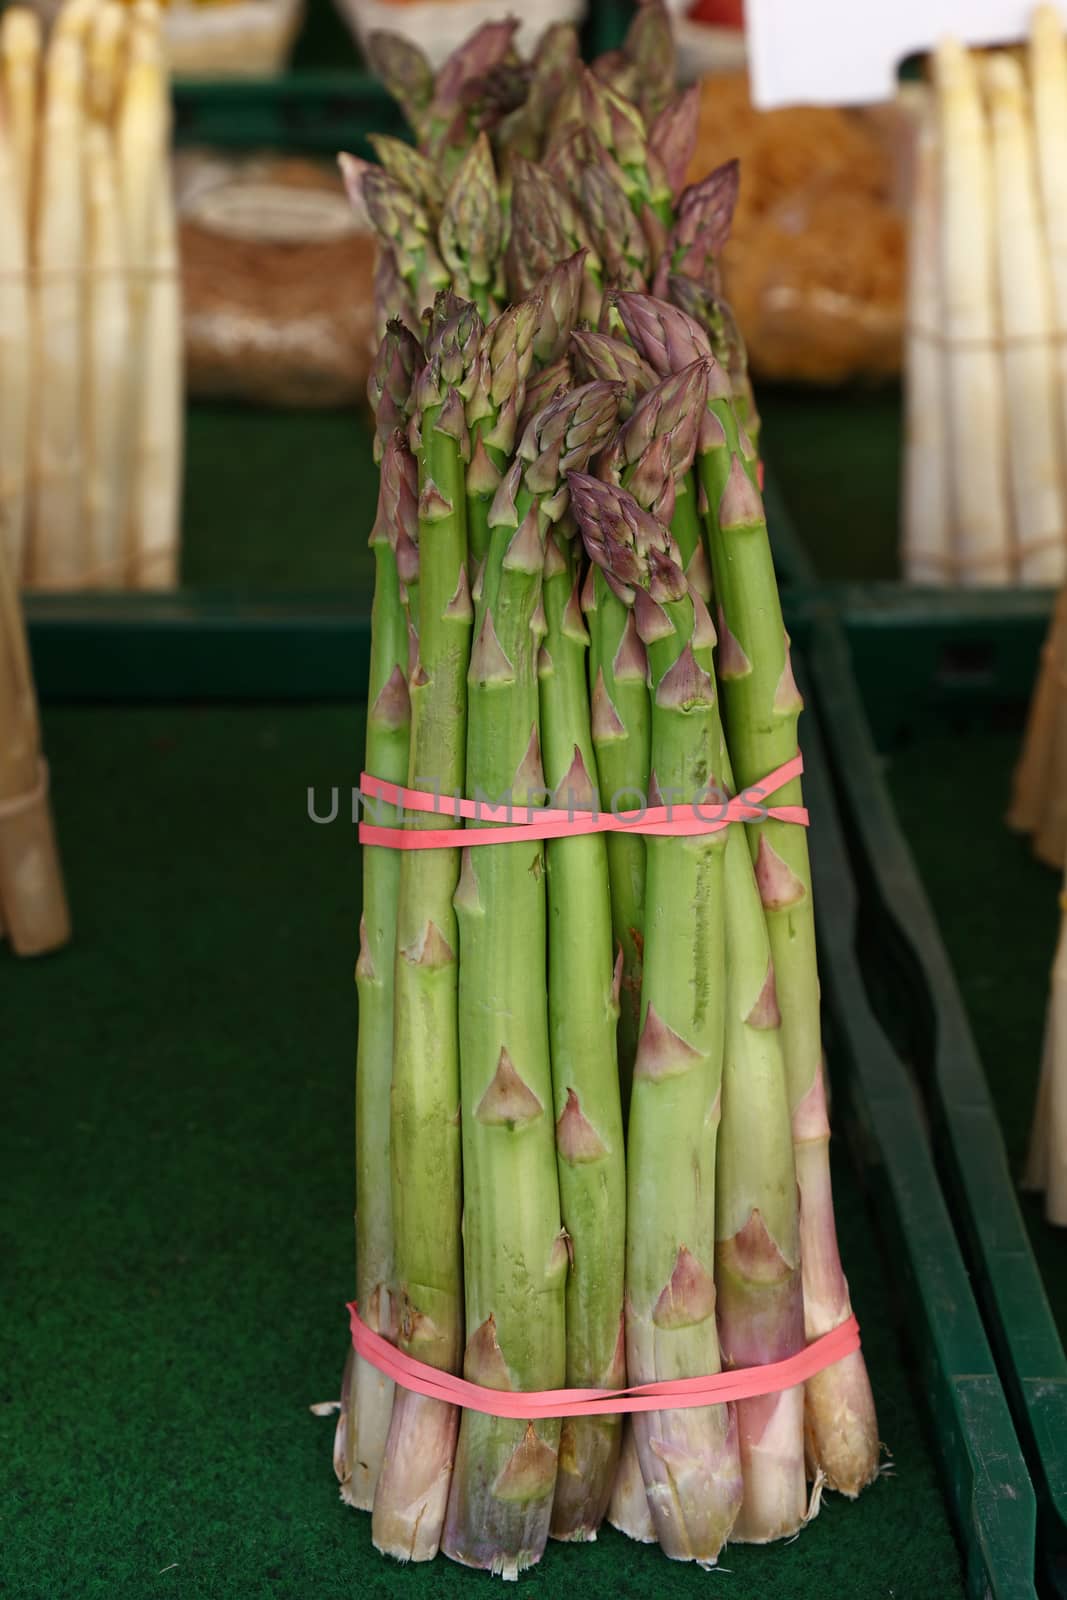 Bundle bunch of fresh green garden asparagus shoots close up, elevated high angle view